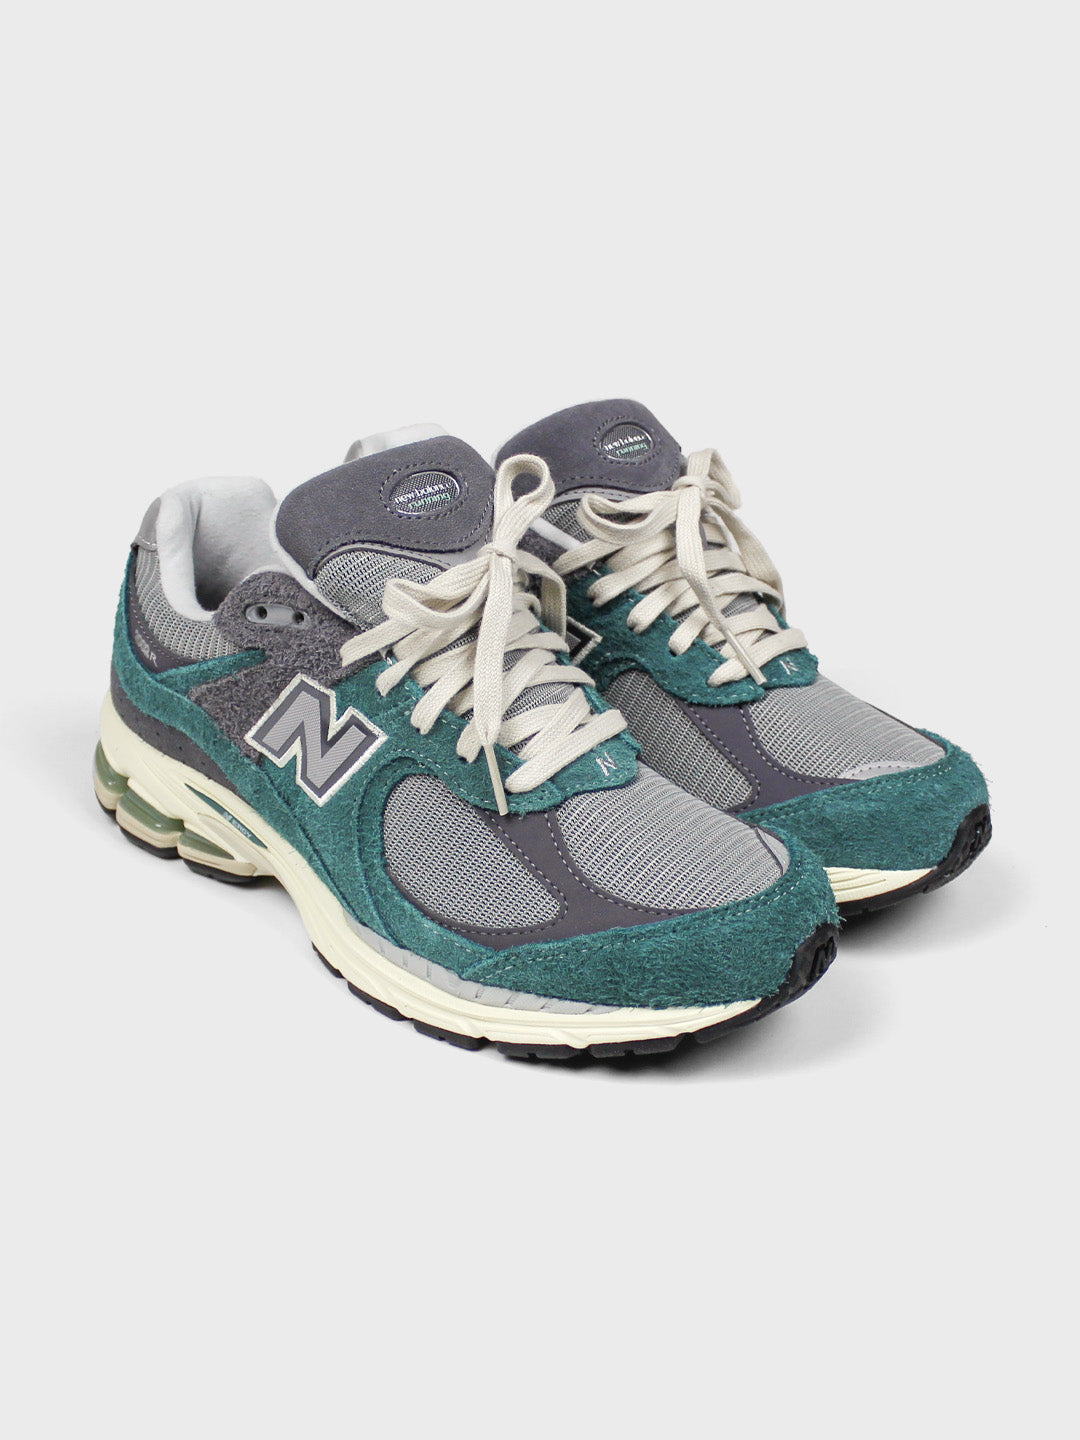 Shop your New Balance Sneakers at Reloadstore